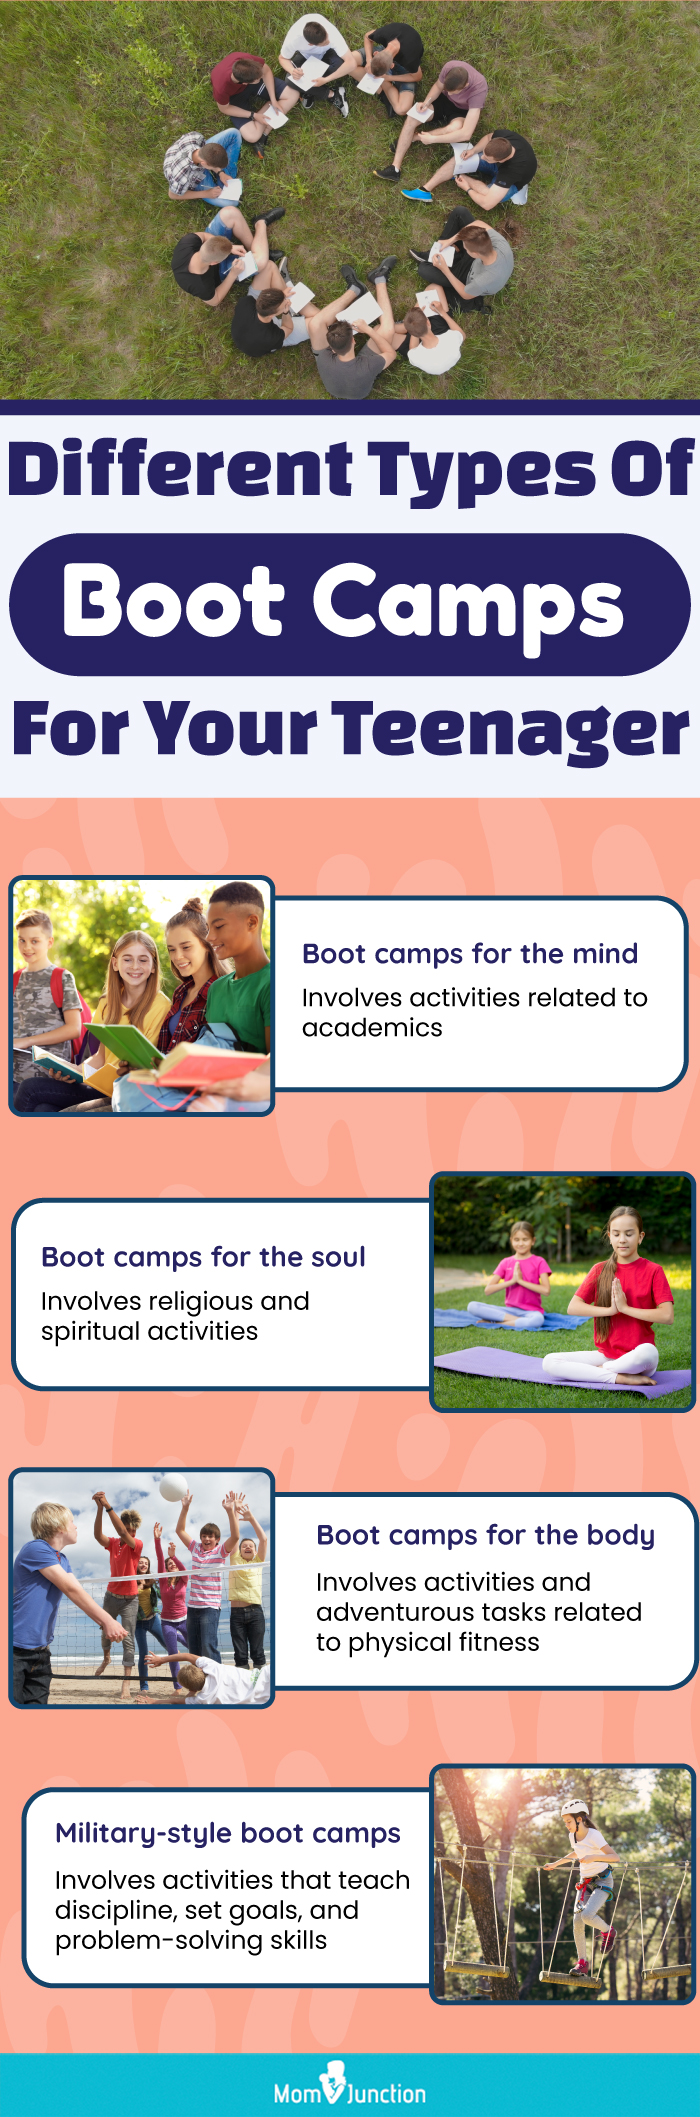 different types of boot camps for your teenager (infographic)